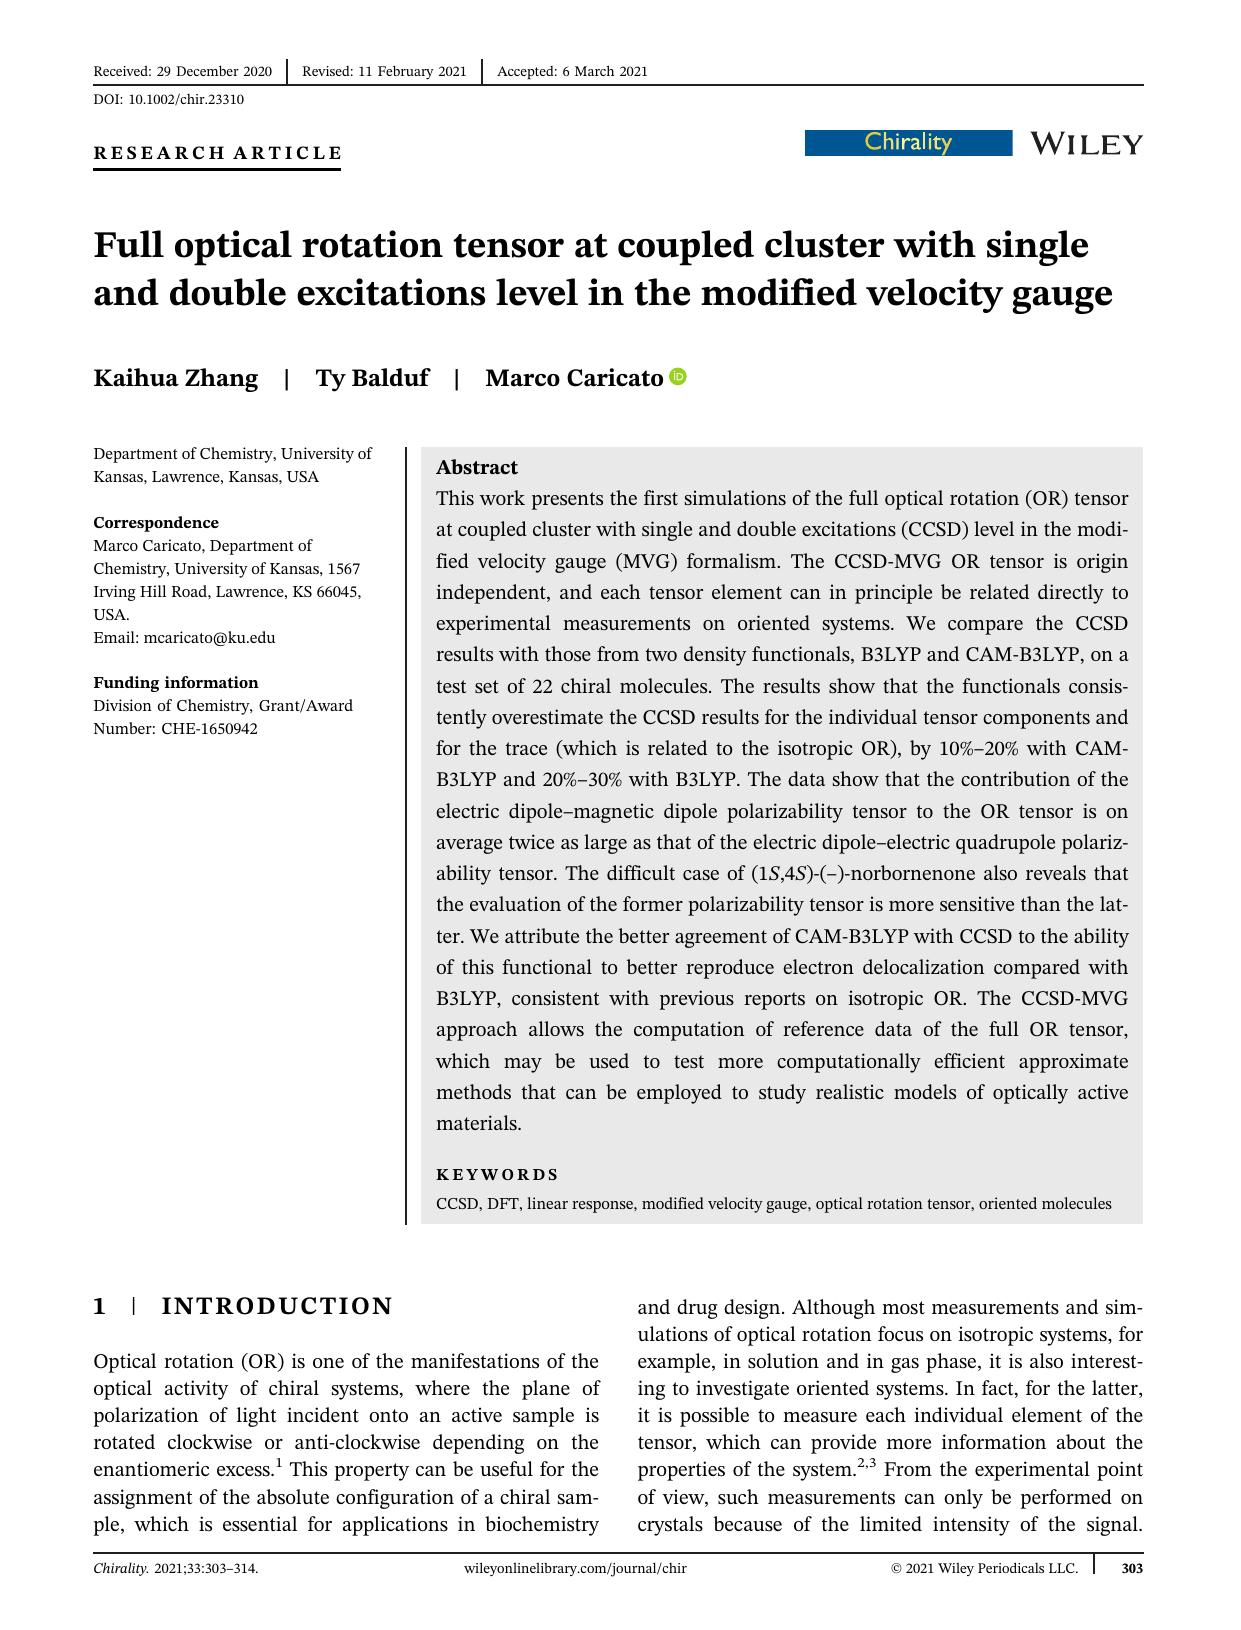 Full optical rotation tensor at coupled cluster with single and double excitations level in the modified velocity gauge by Kaihua Zhang Ty Balduf Marco Caricato